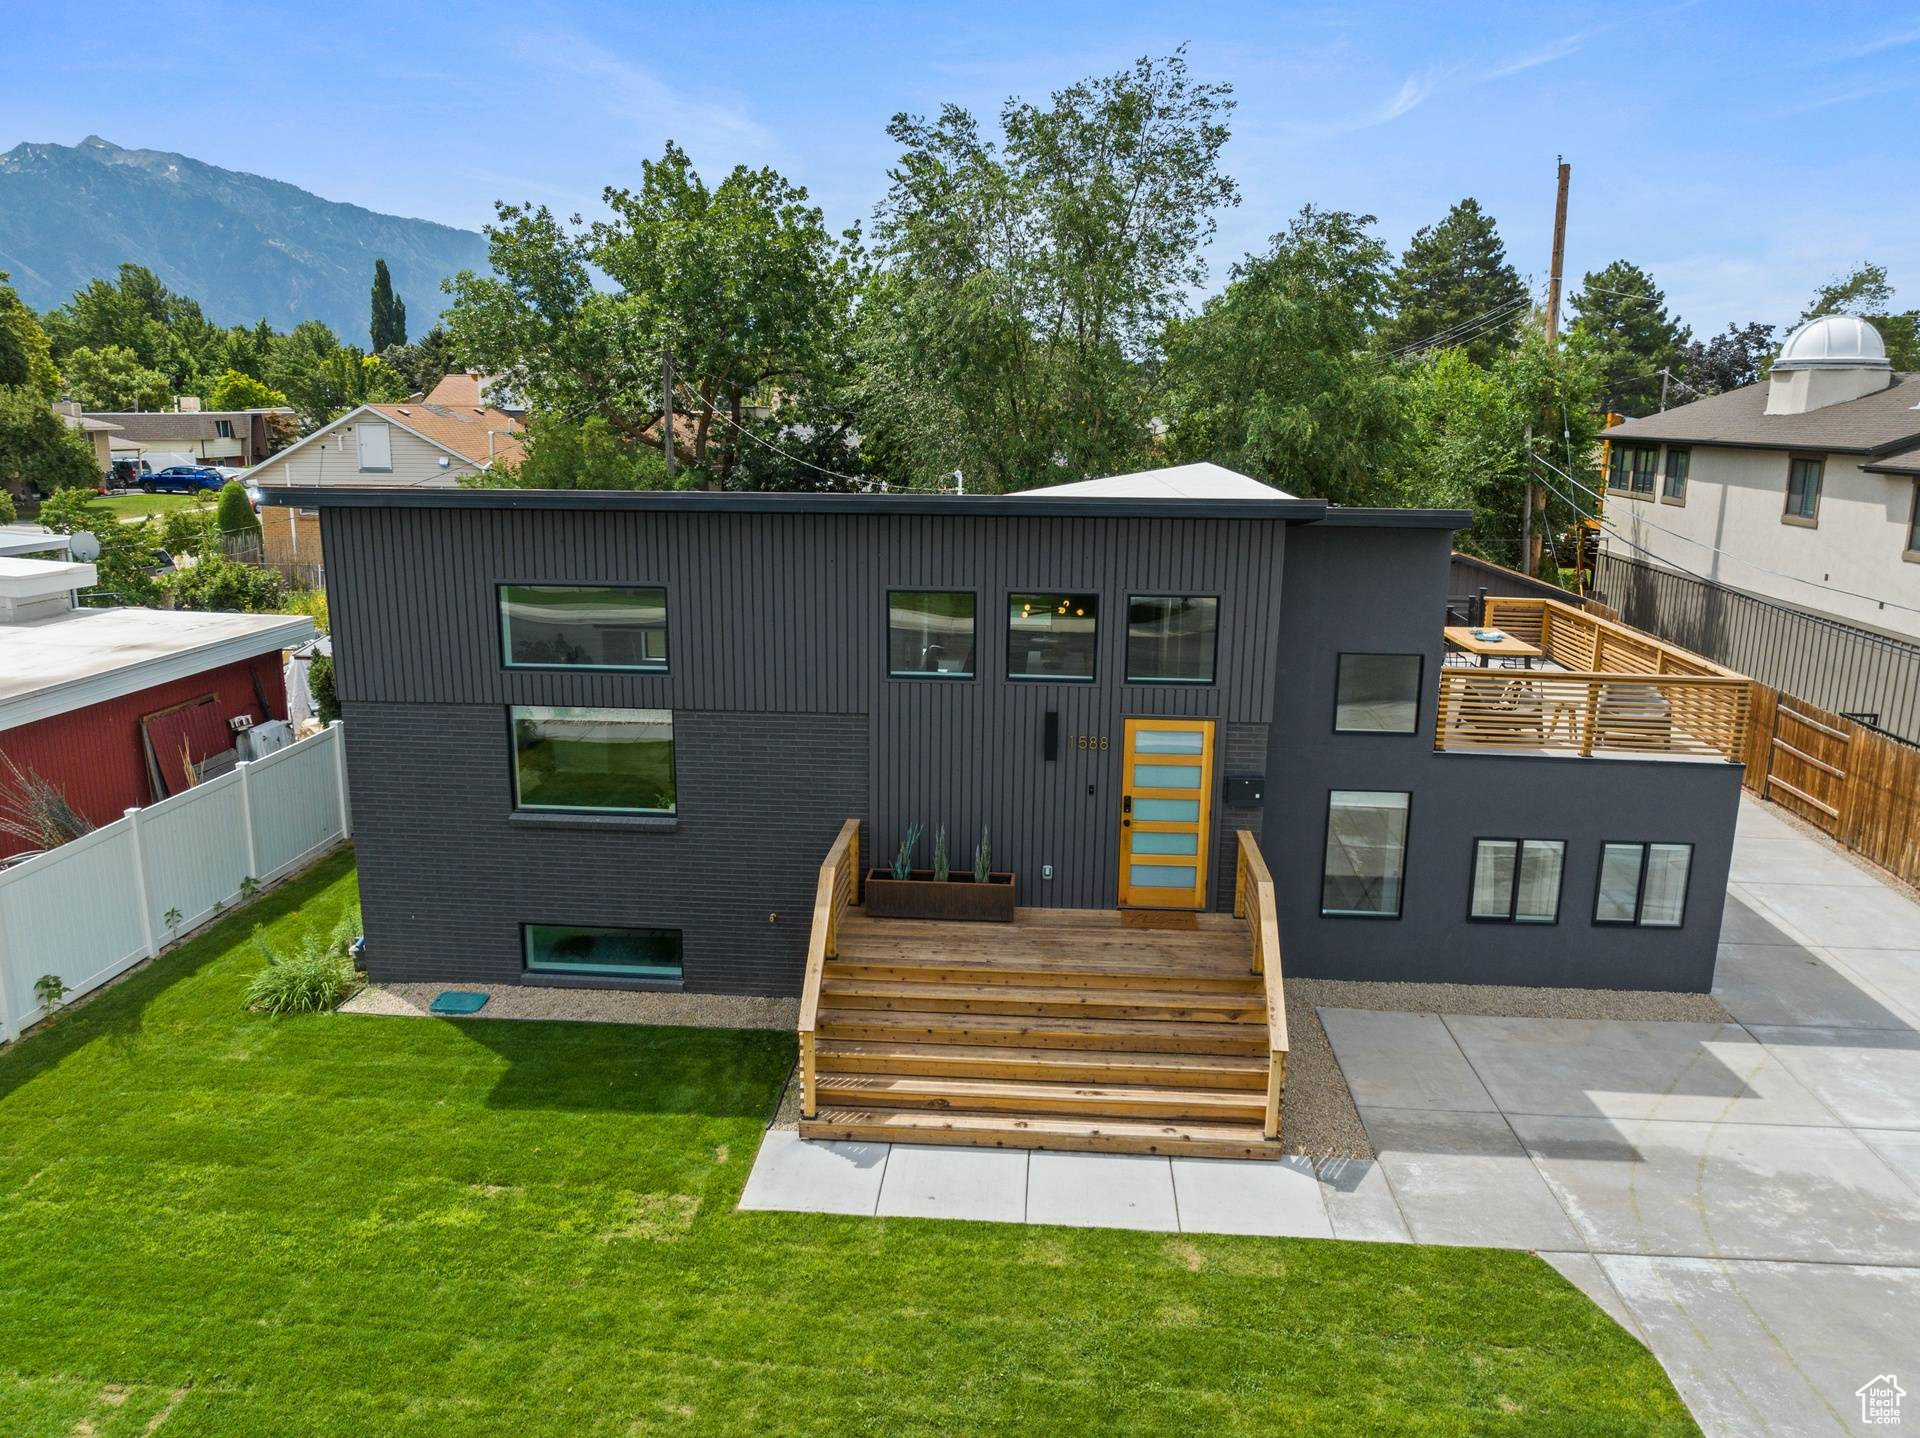 Contemporary home featuring a front lawn, a mountain view, and a patio